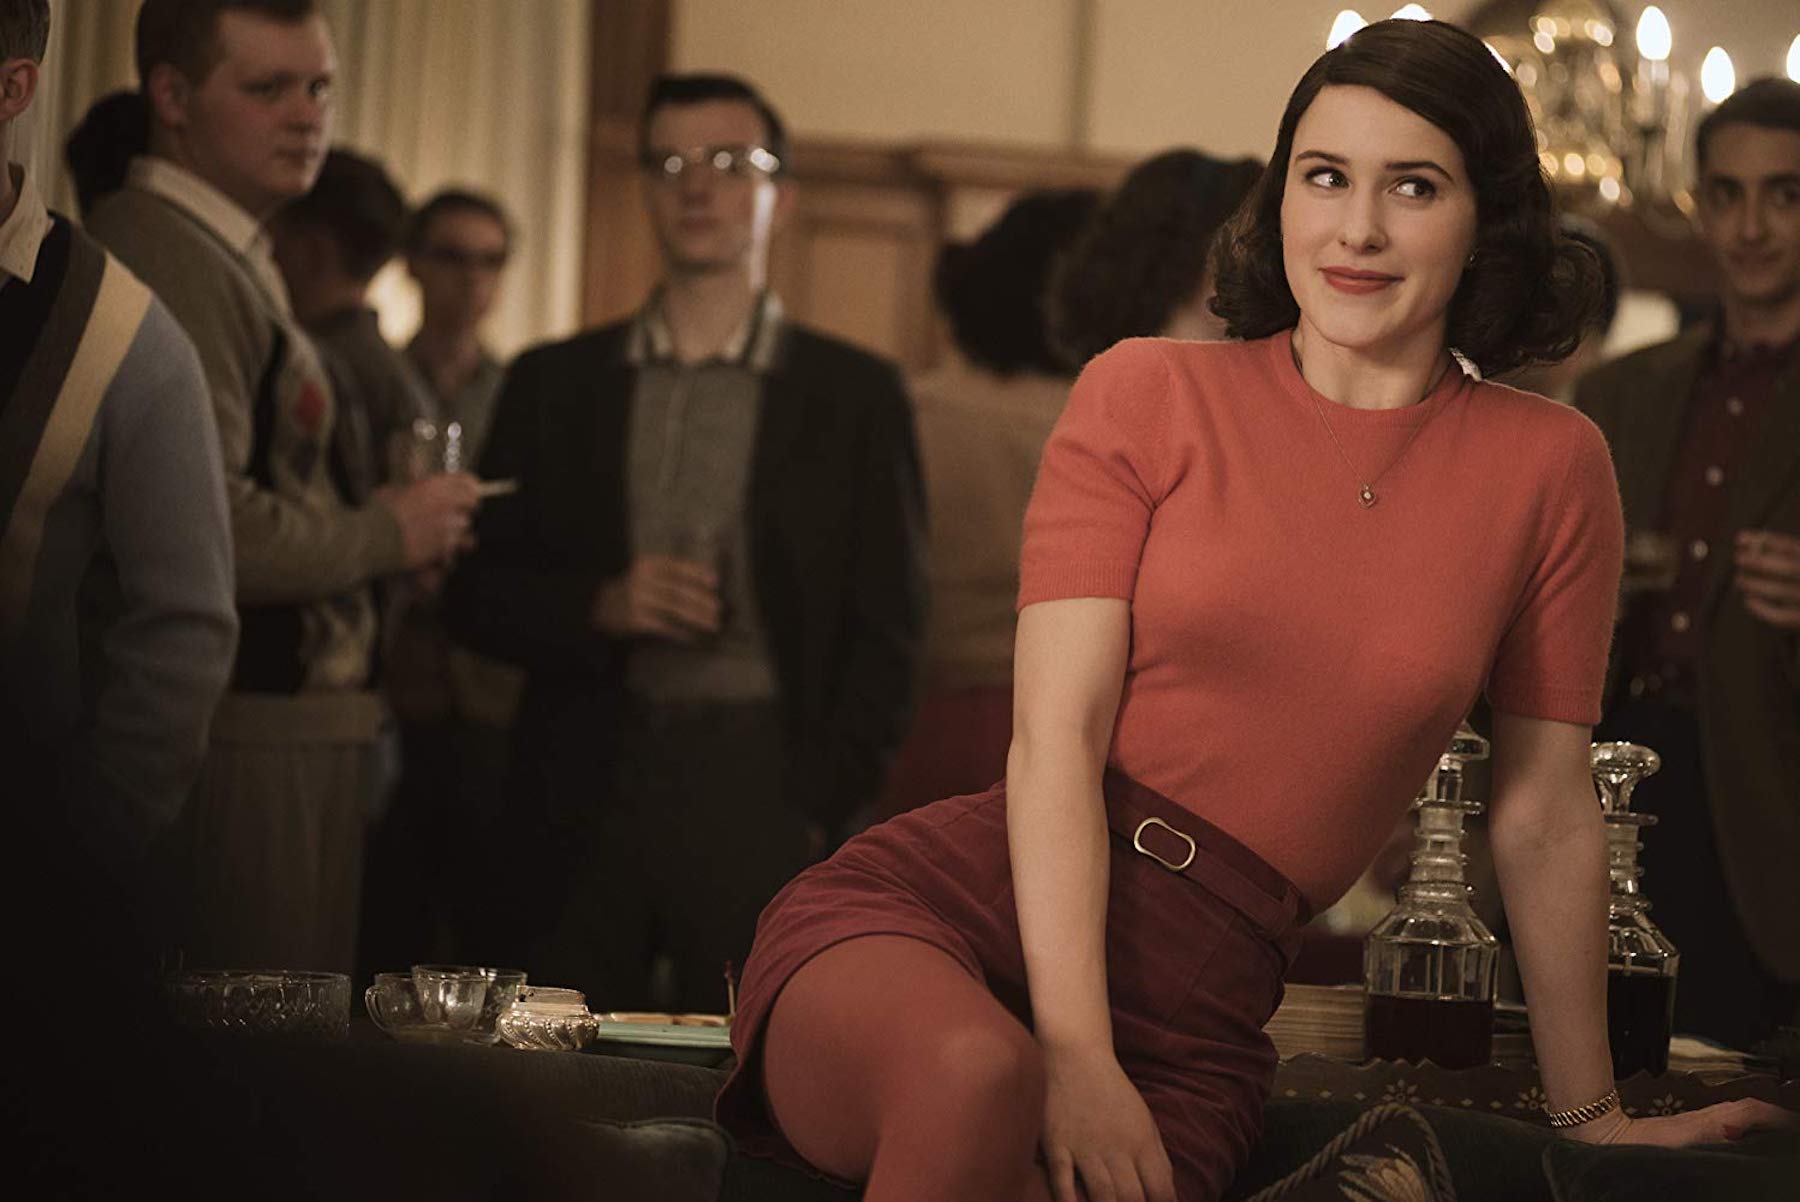 'The Marvelous Mrs. Maisel' follows a Jewish housewife who uses her newfound comedic talent to rebuild a different life for herself.